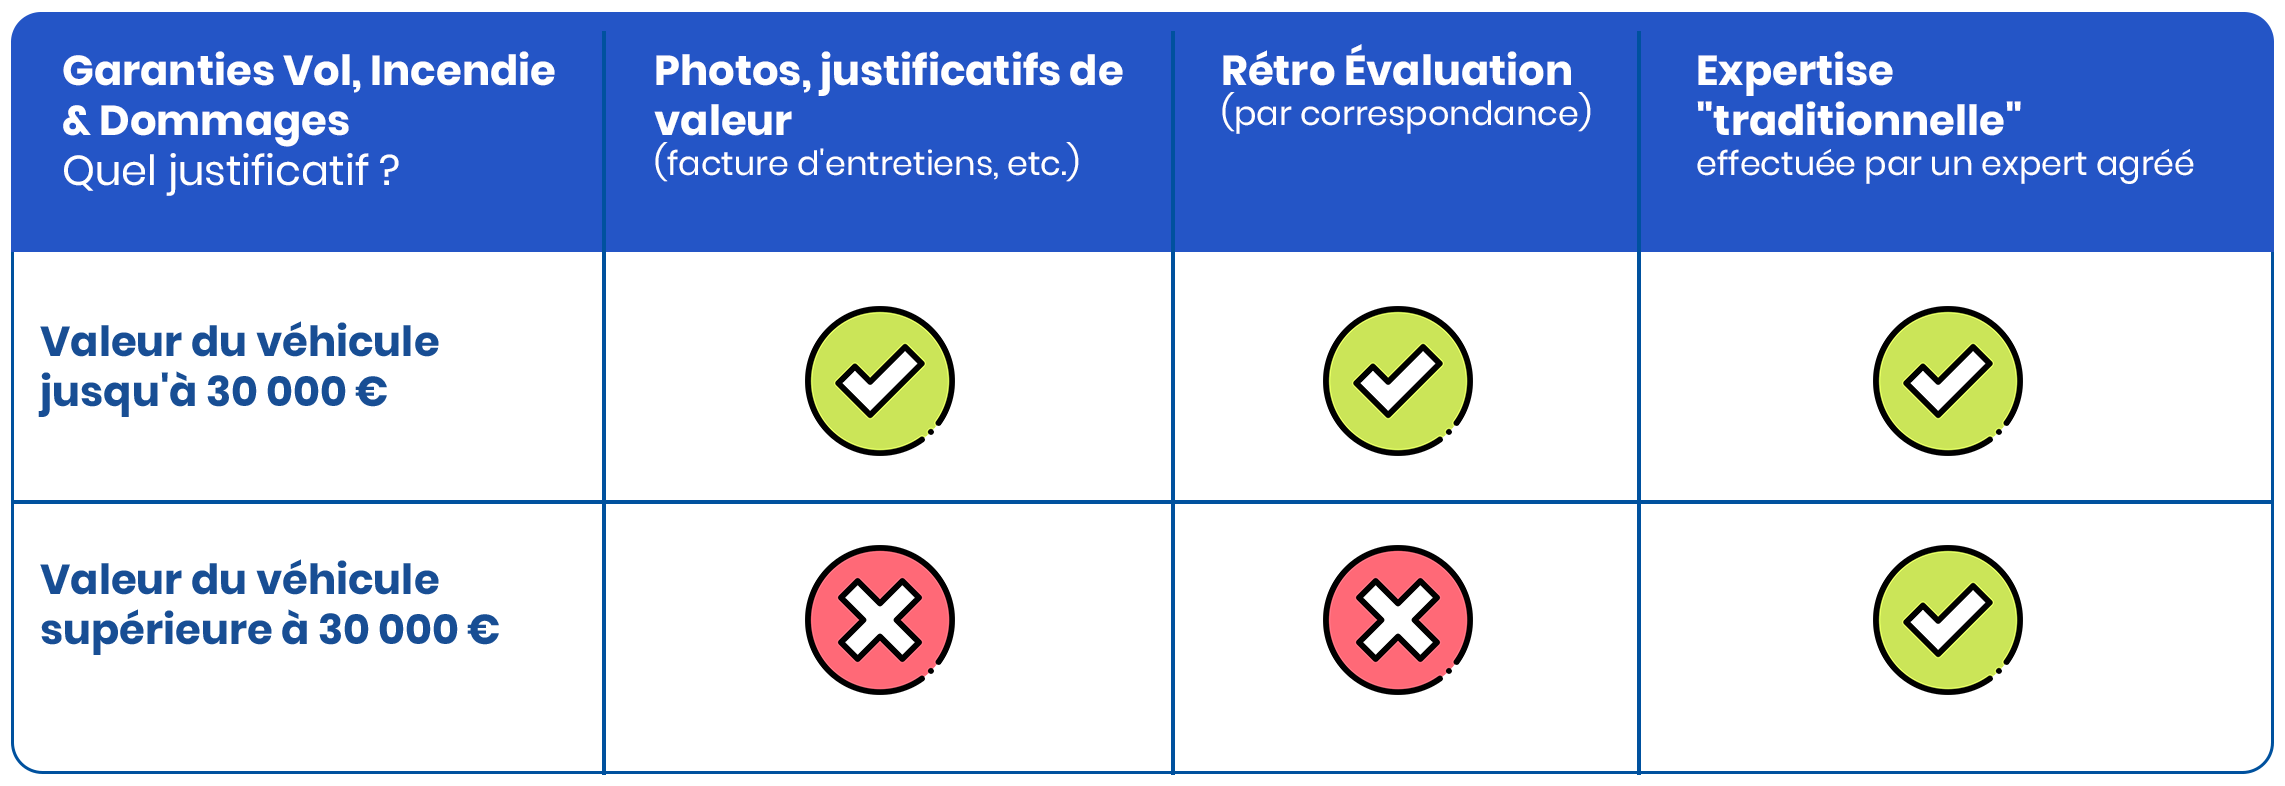 tableau justificatifs expertises collection